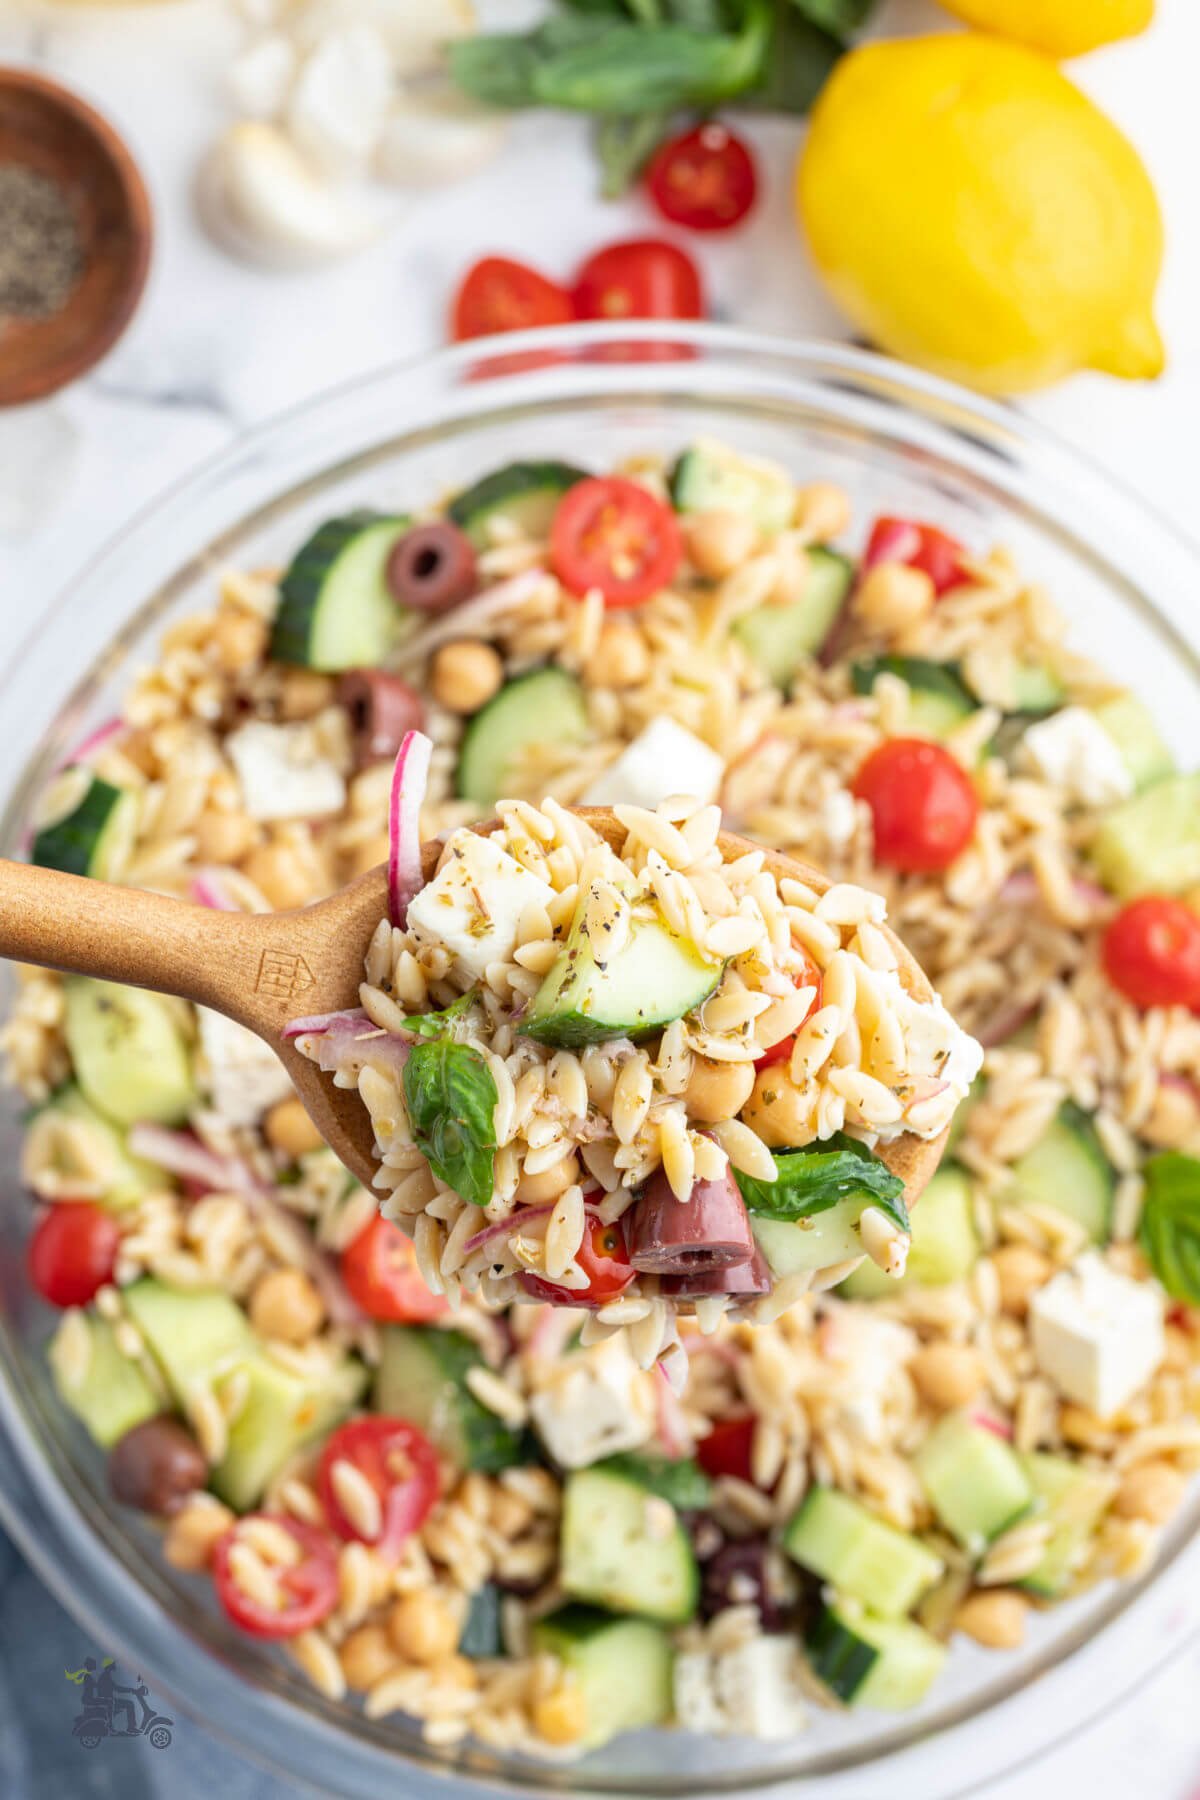 Wooden serving spoon holding a spoonful of the pasta salad made with orzo pasta with Greek vegetables and seasoning. 